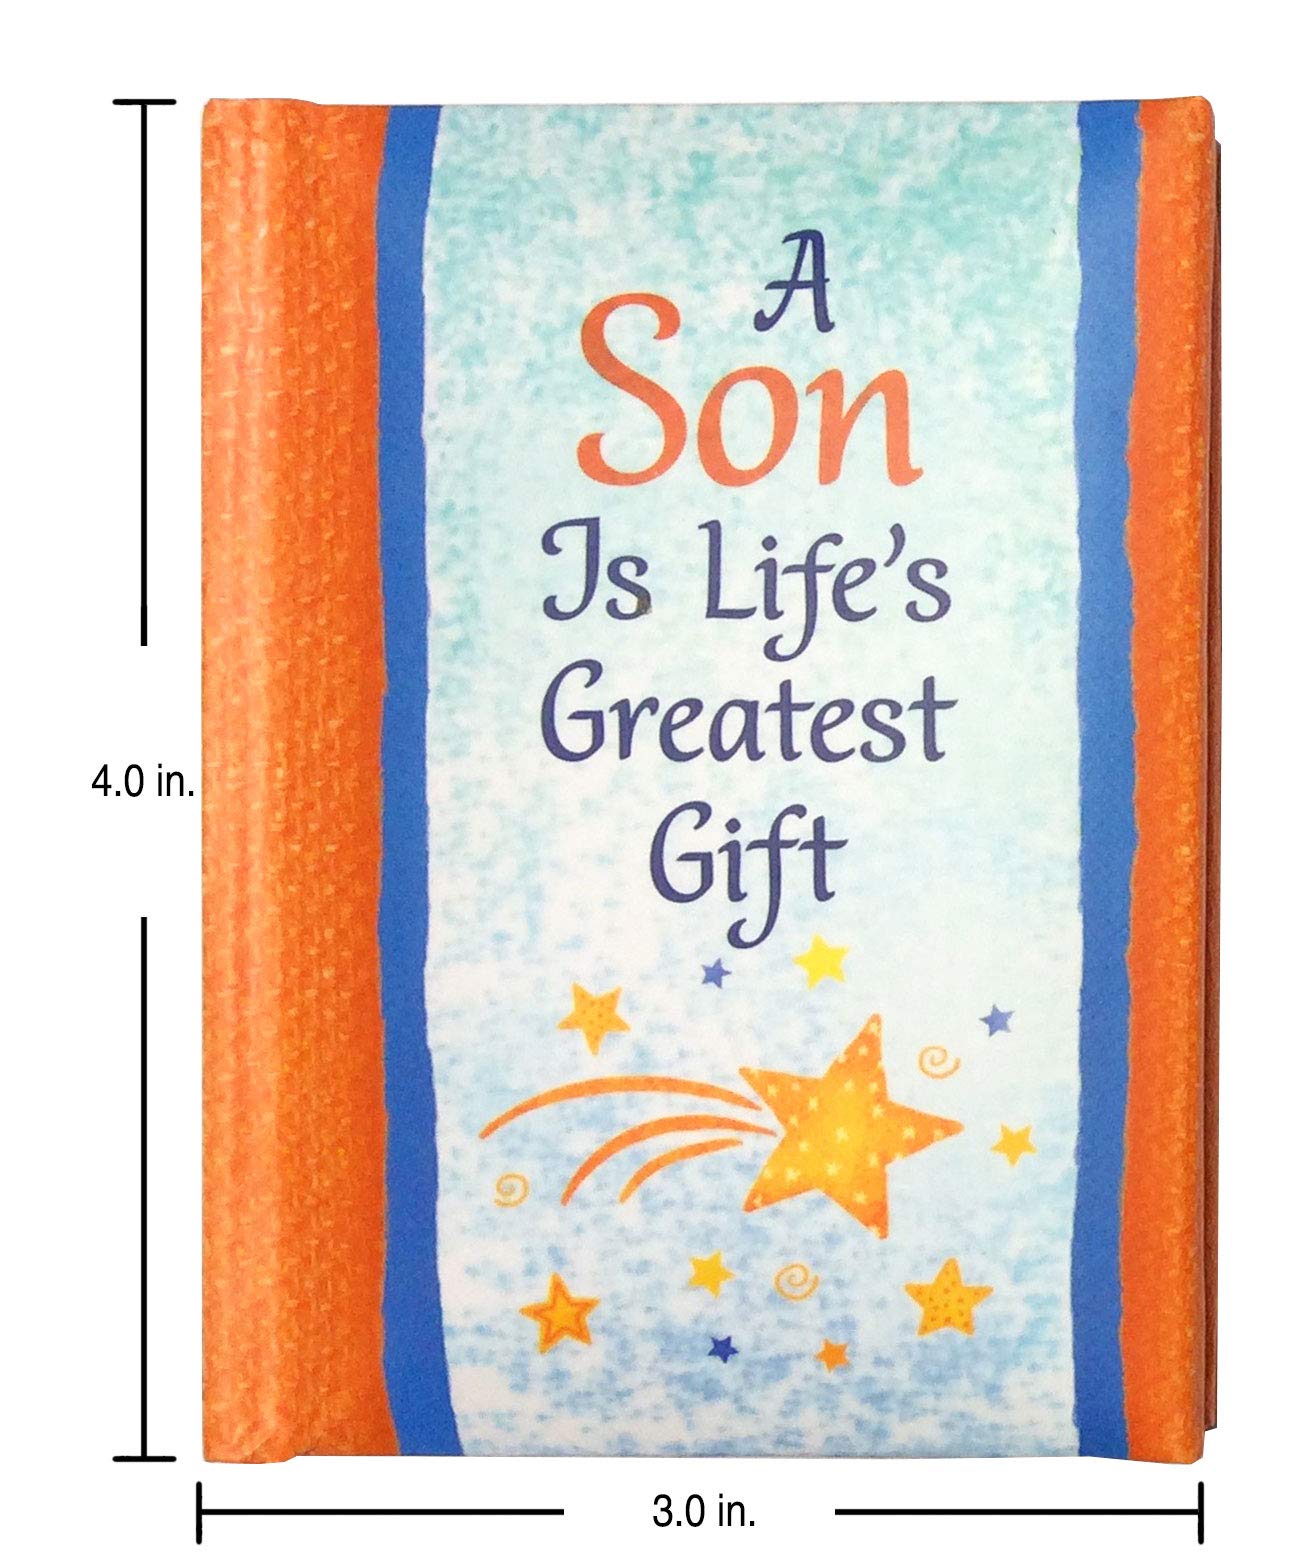 Blue Mountain Arts Mini Book (A Son Is Life’s Greatest Gift)—Birthday Gift, Graduation Gift, Thinking of You Gift, Just Because Gift, or Stocking Stuffer for Son, 4 x 3 inches